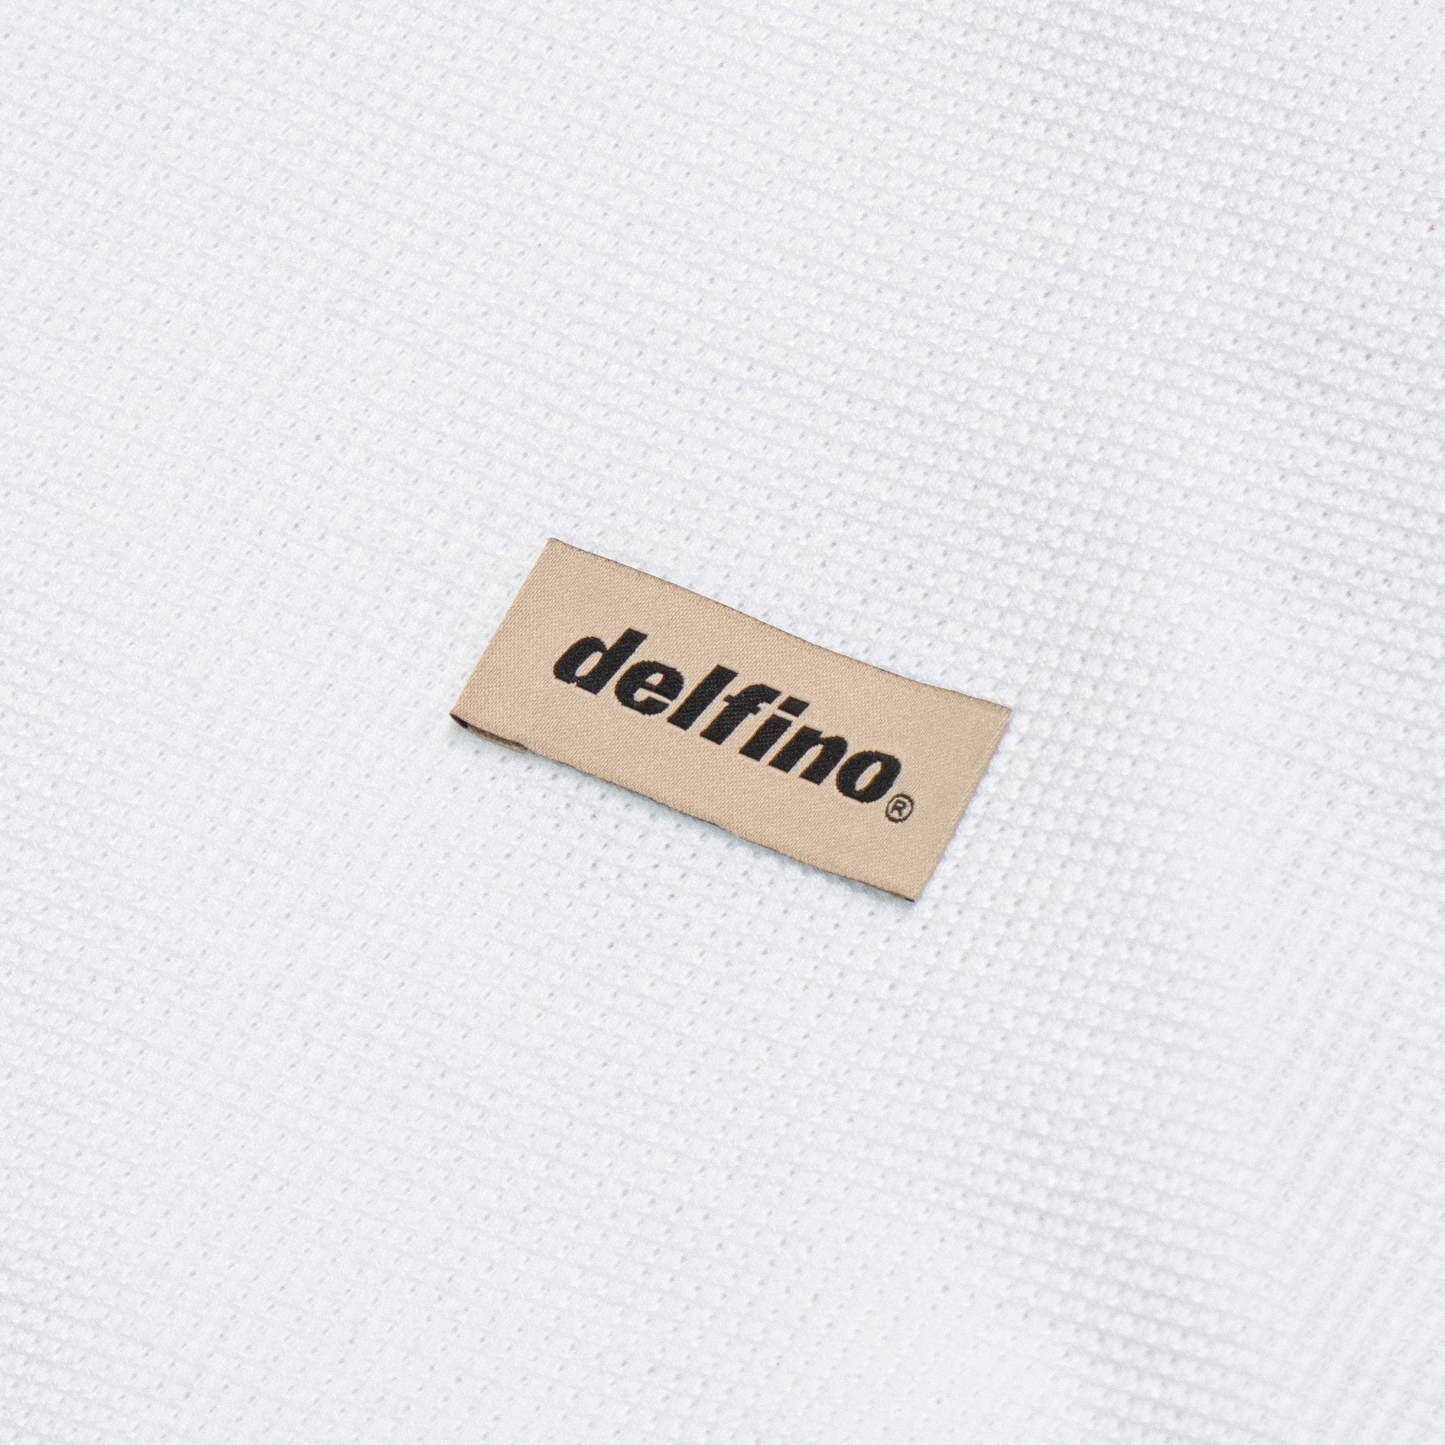 MELLOW THERMAL - LONG SLEEVE - BLANCO